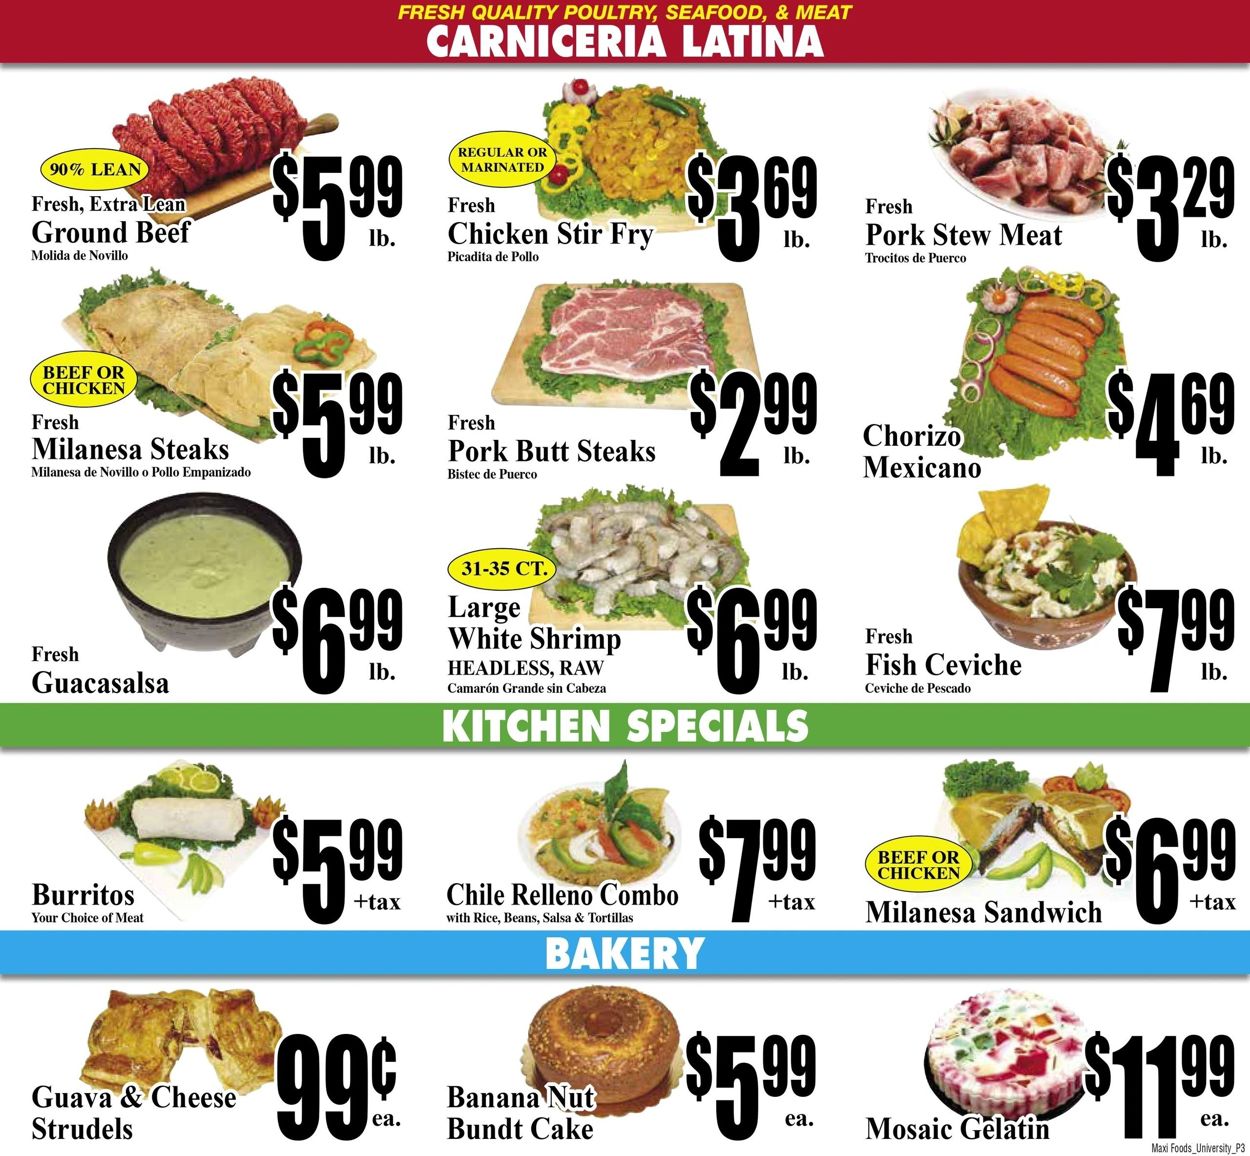 Maxi Foods Ad from 05/18/2022